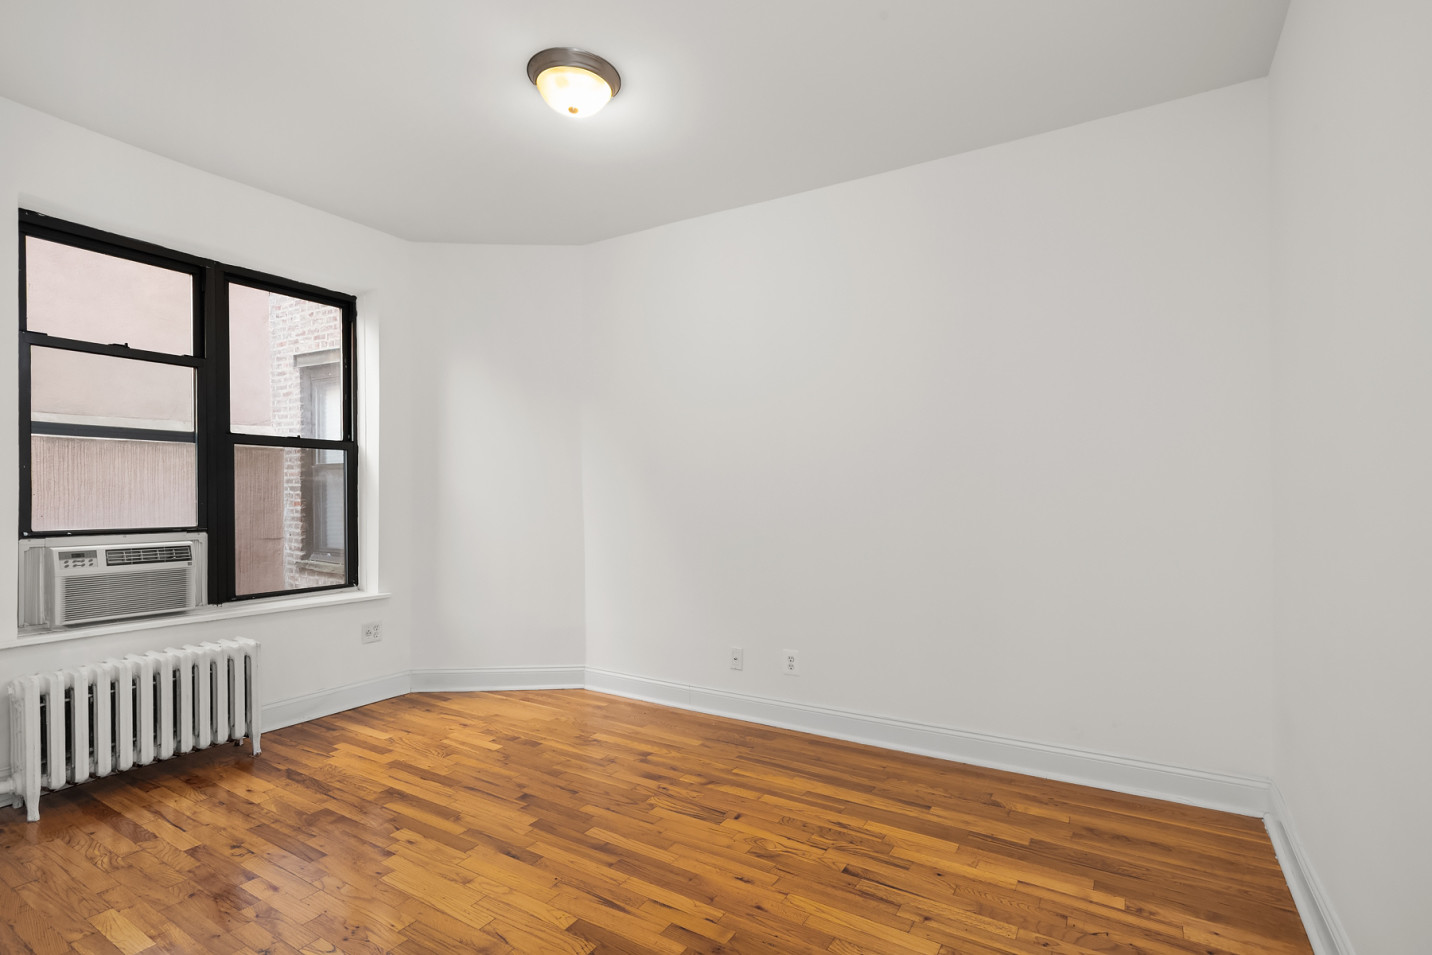 17 attractive Hardwood Floor Repair Queens Ny 2024 free download hardwood floor repair queens ny of gavin hammon real estate agent in new york city compass intended for 770c19a9a1be2826841a9c0003e8017f499c0f38